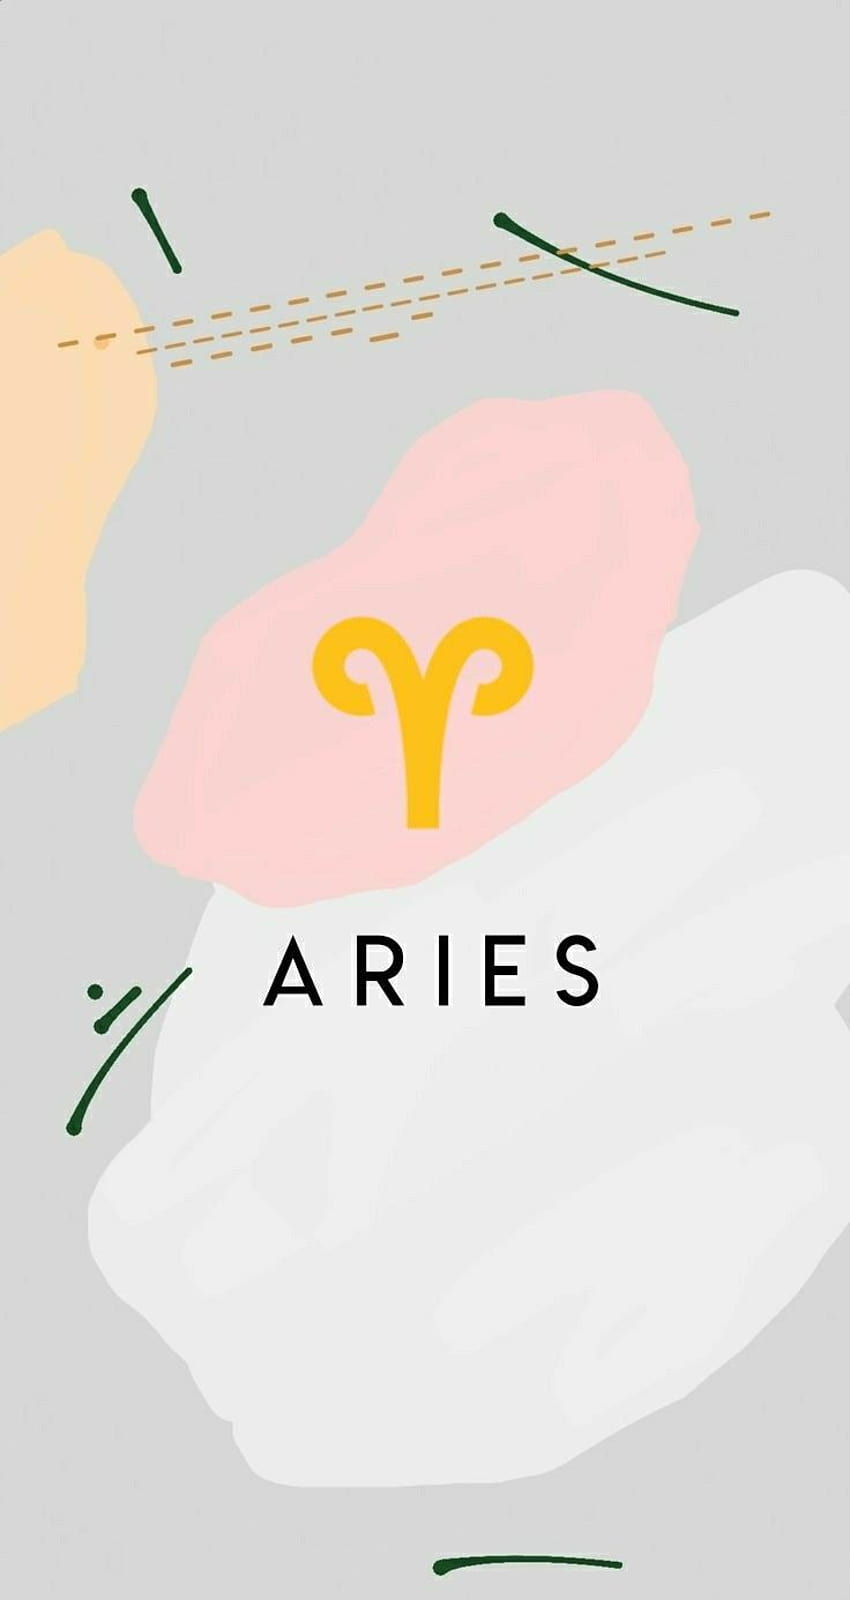 Aries wallpaper by your side - March, Aries